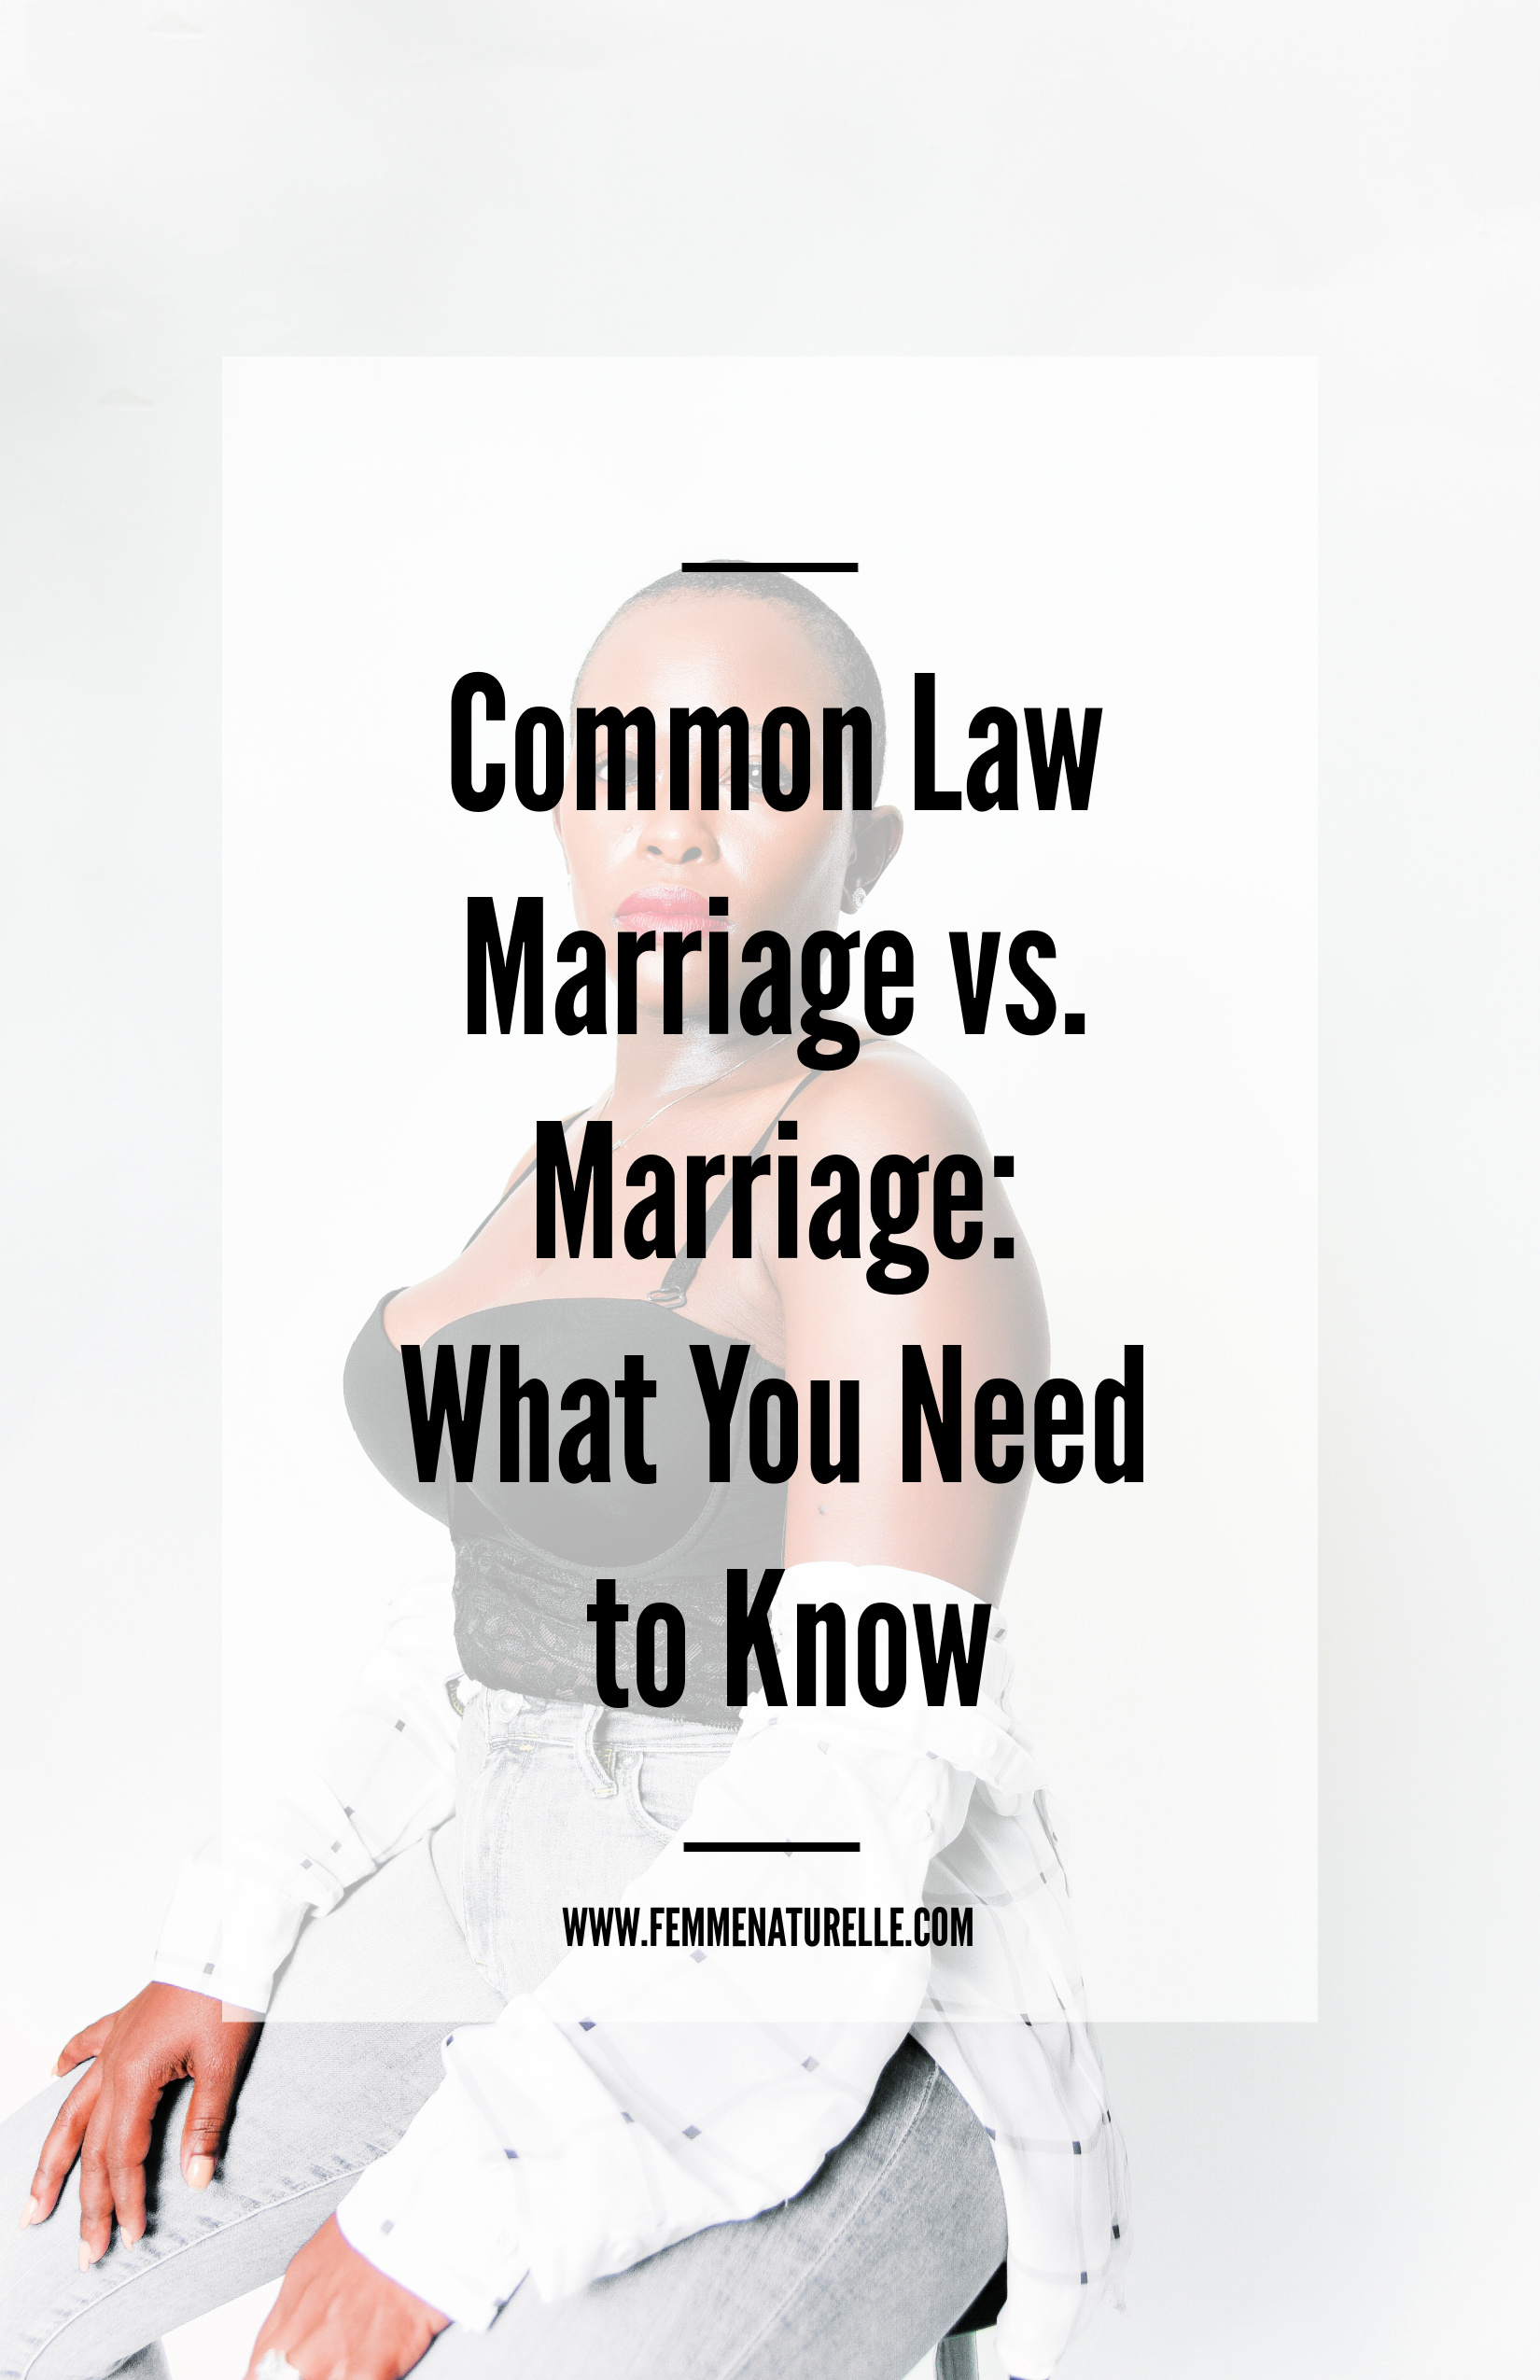 Common Law Marriage vs. Marriage